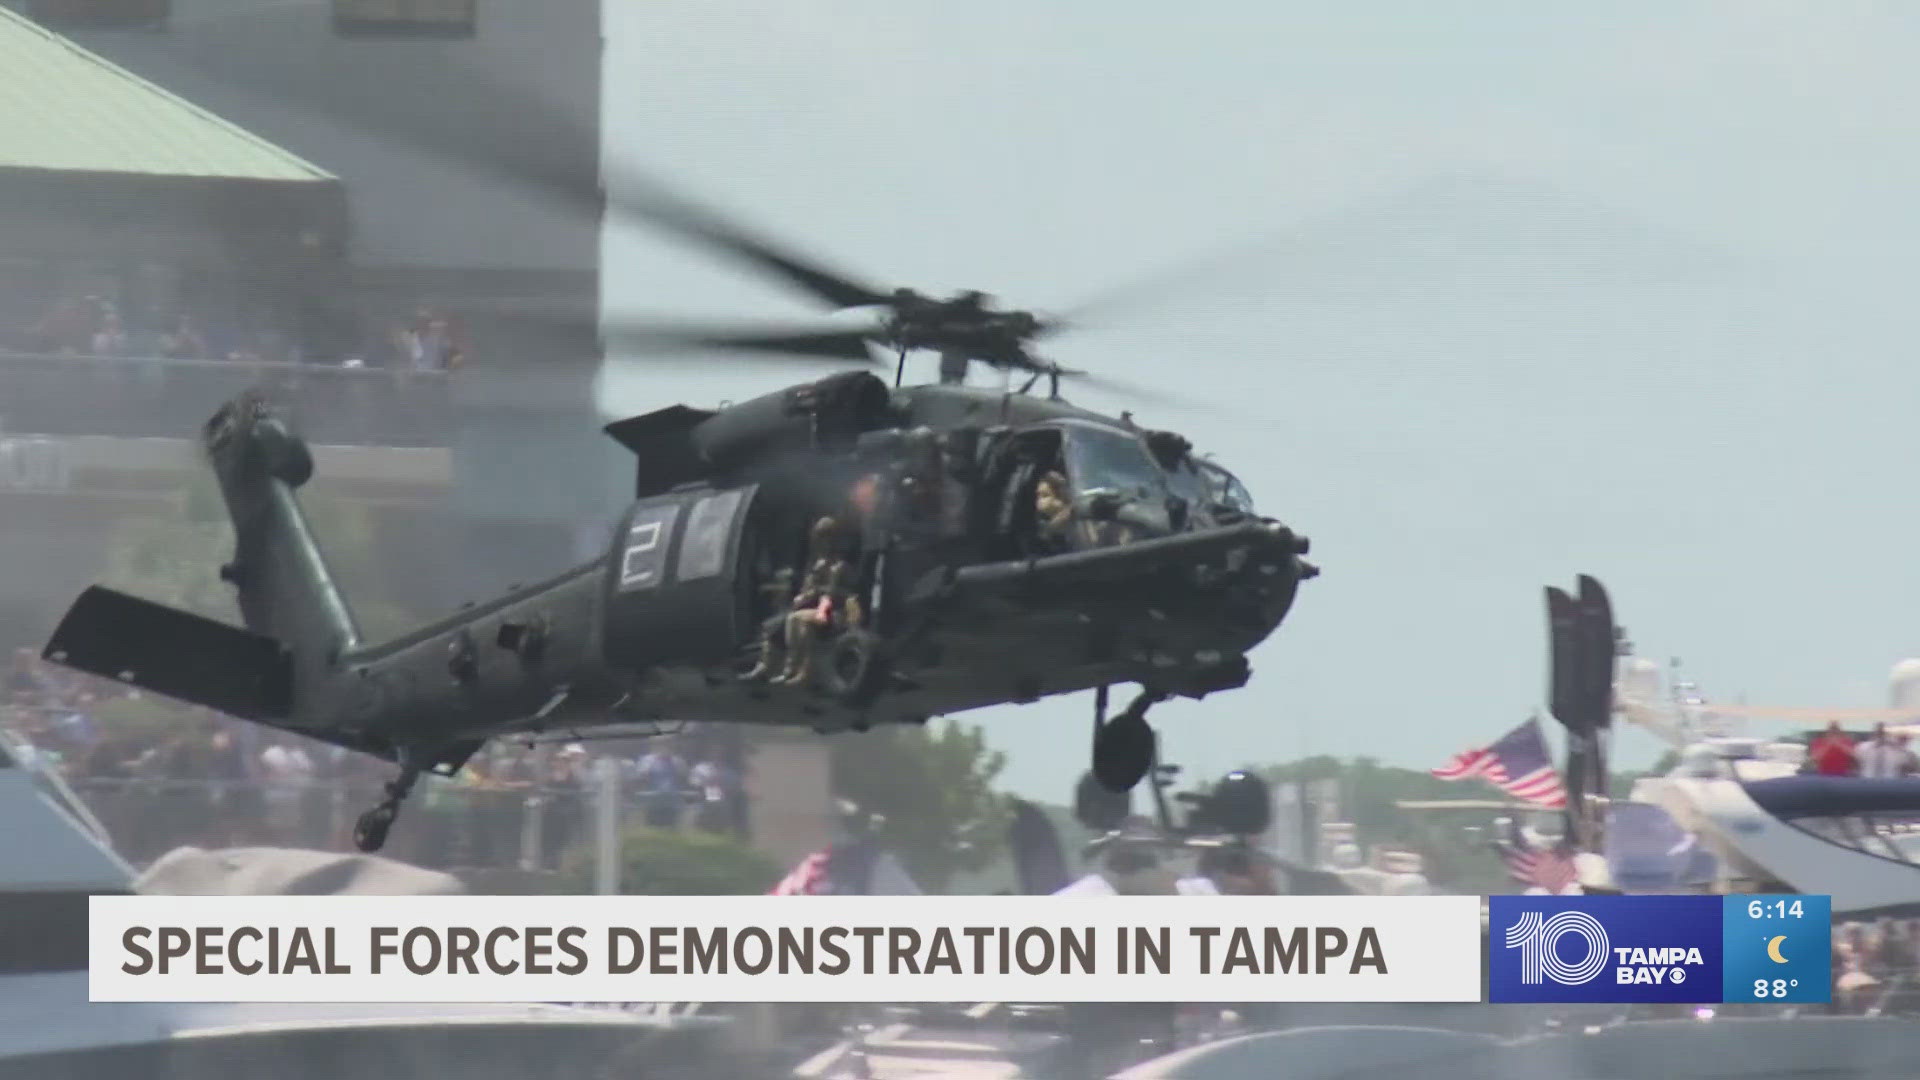 Thousands of people gathered at the Hillsborough River near the Tampa Convention Center to see it all go down.